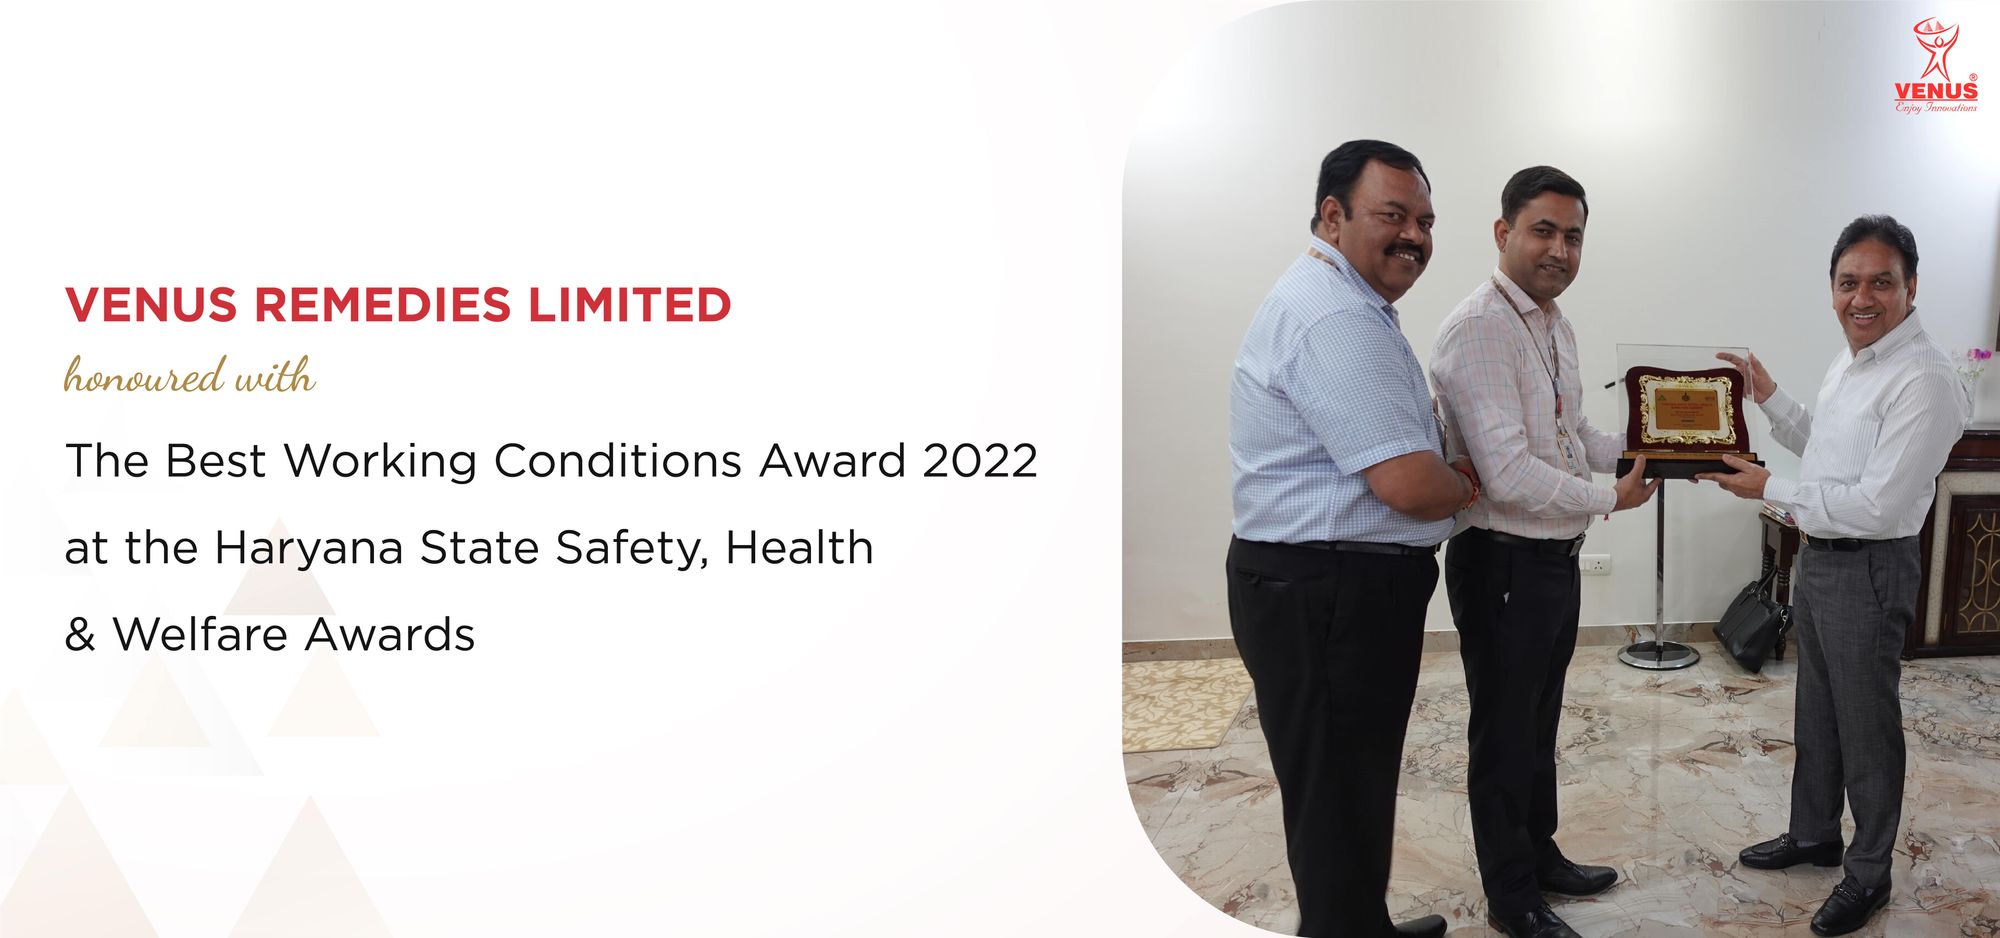 Venus Remedies Limited Receives Best Working Conditions Award 2022